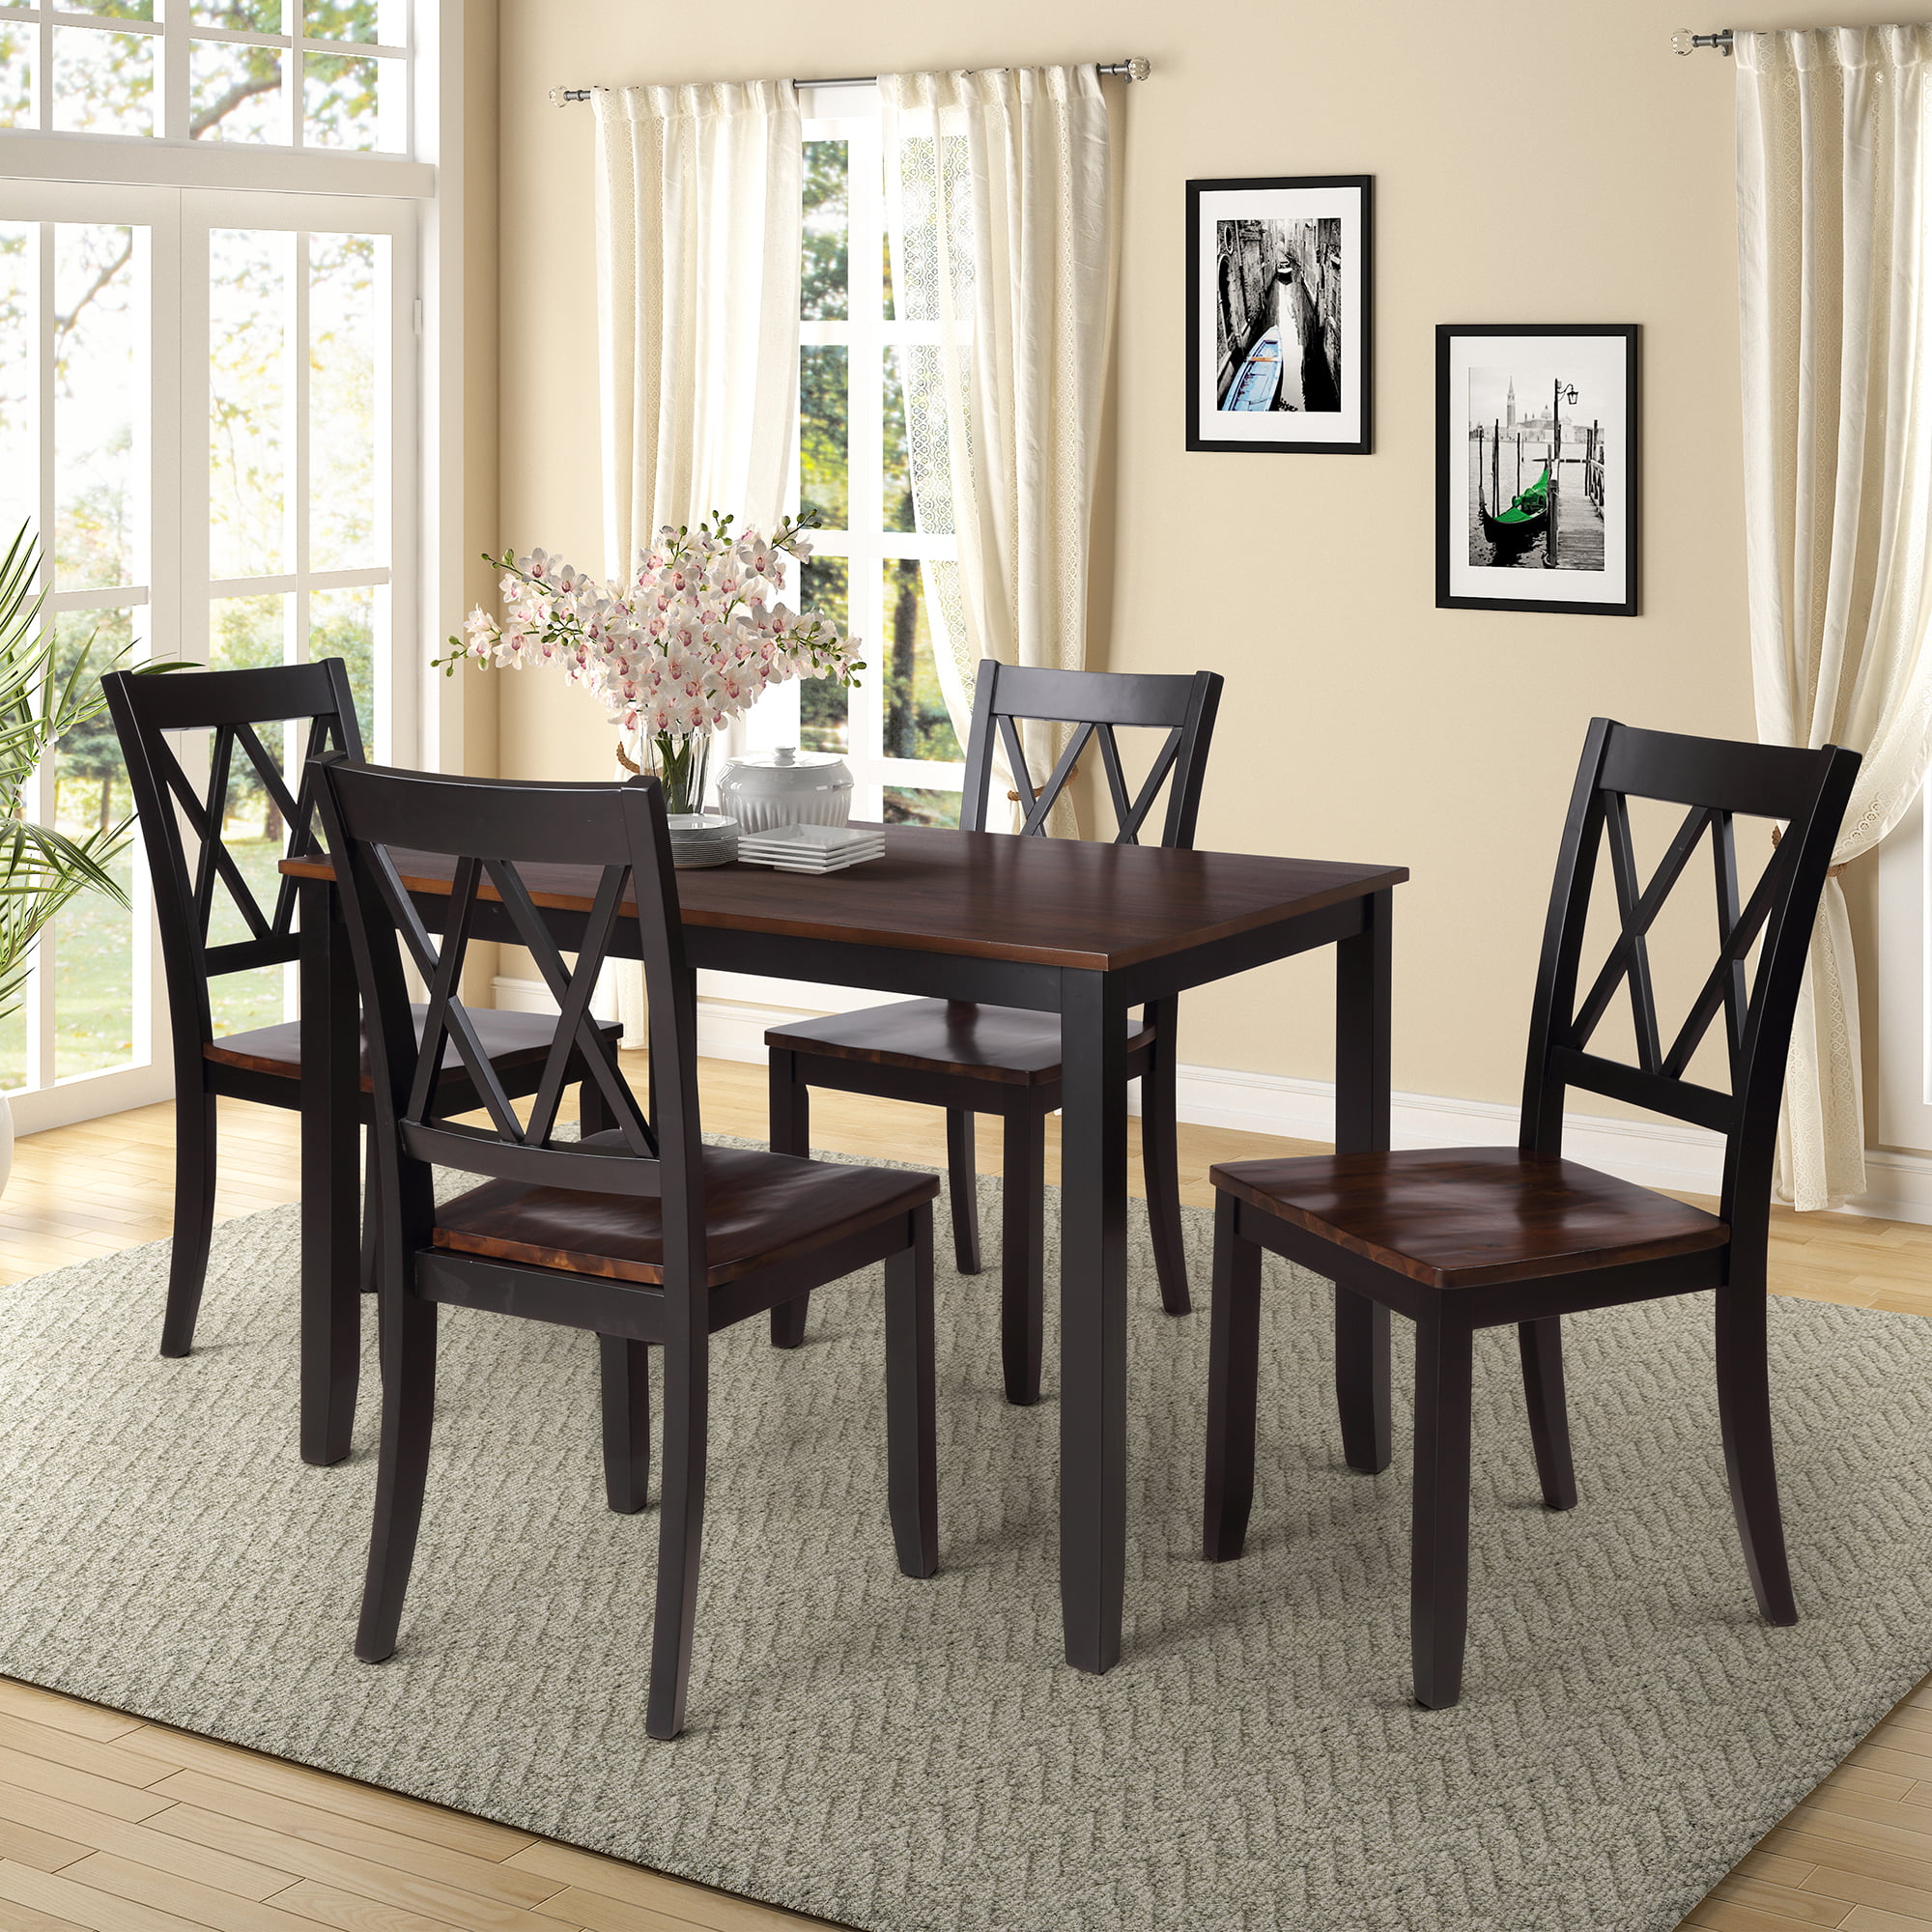  table and dining chairs with contemporary spaces